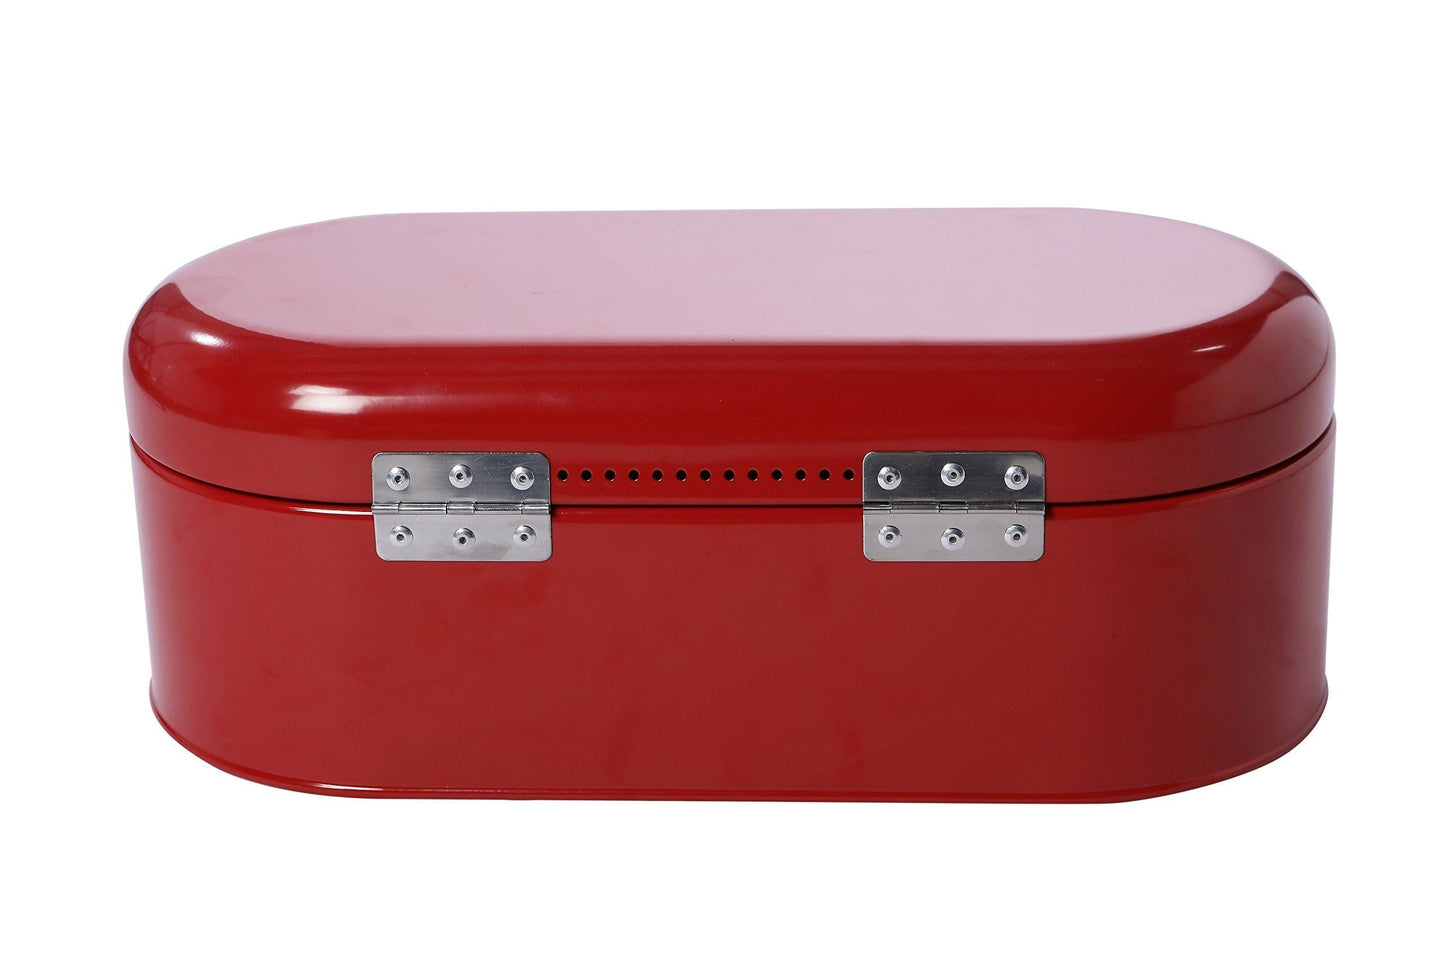 New large bread box for kitchen counter bread bin storage container with lid metal vintage retro design for loaves sliced bread pastries red 17 x 9 x 6 inches